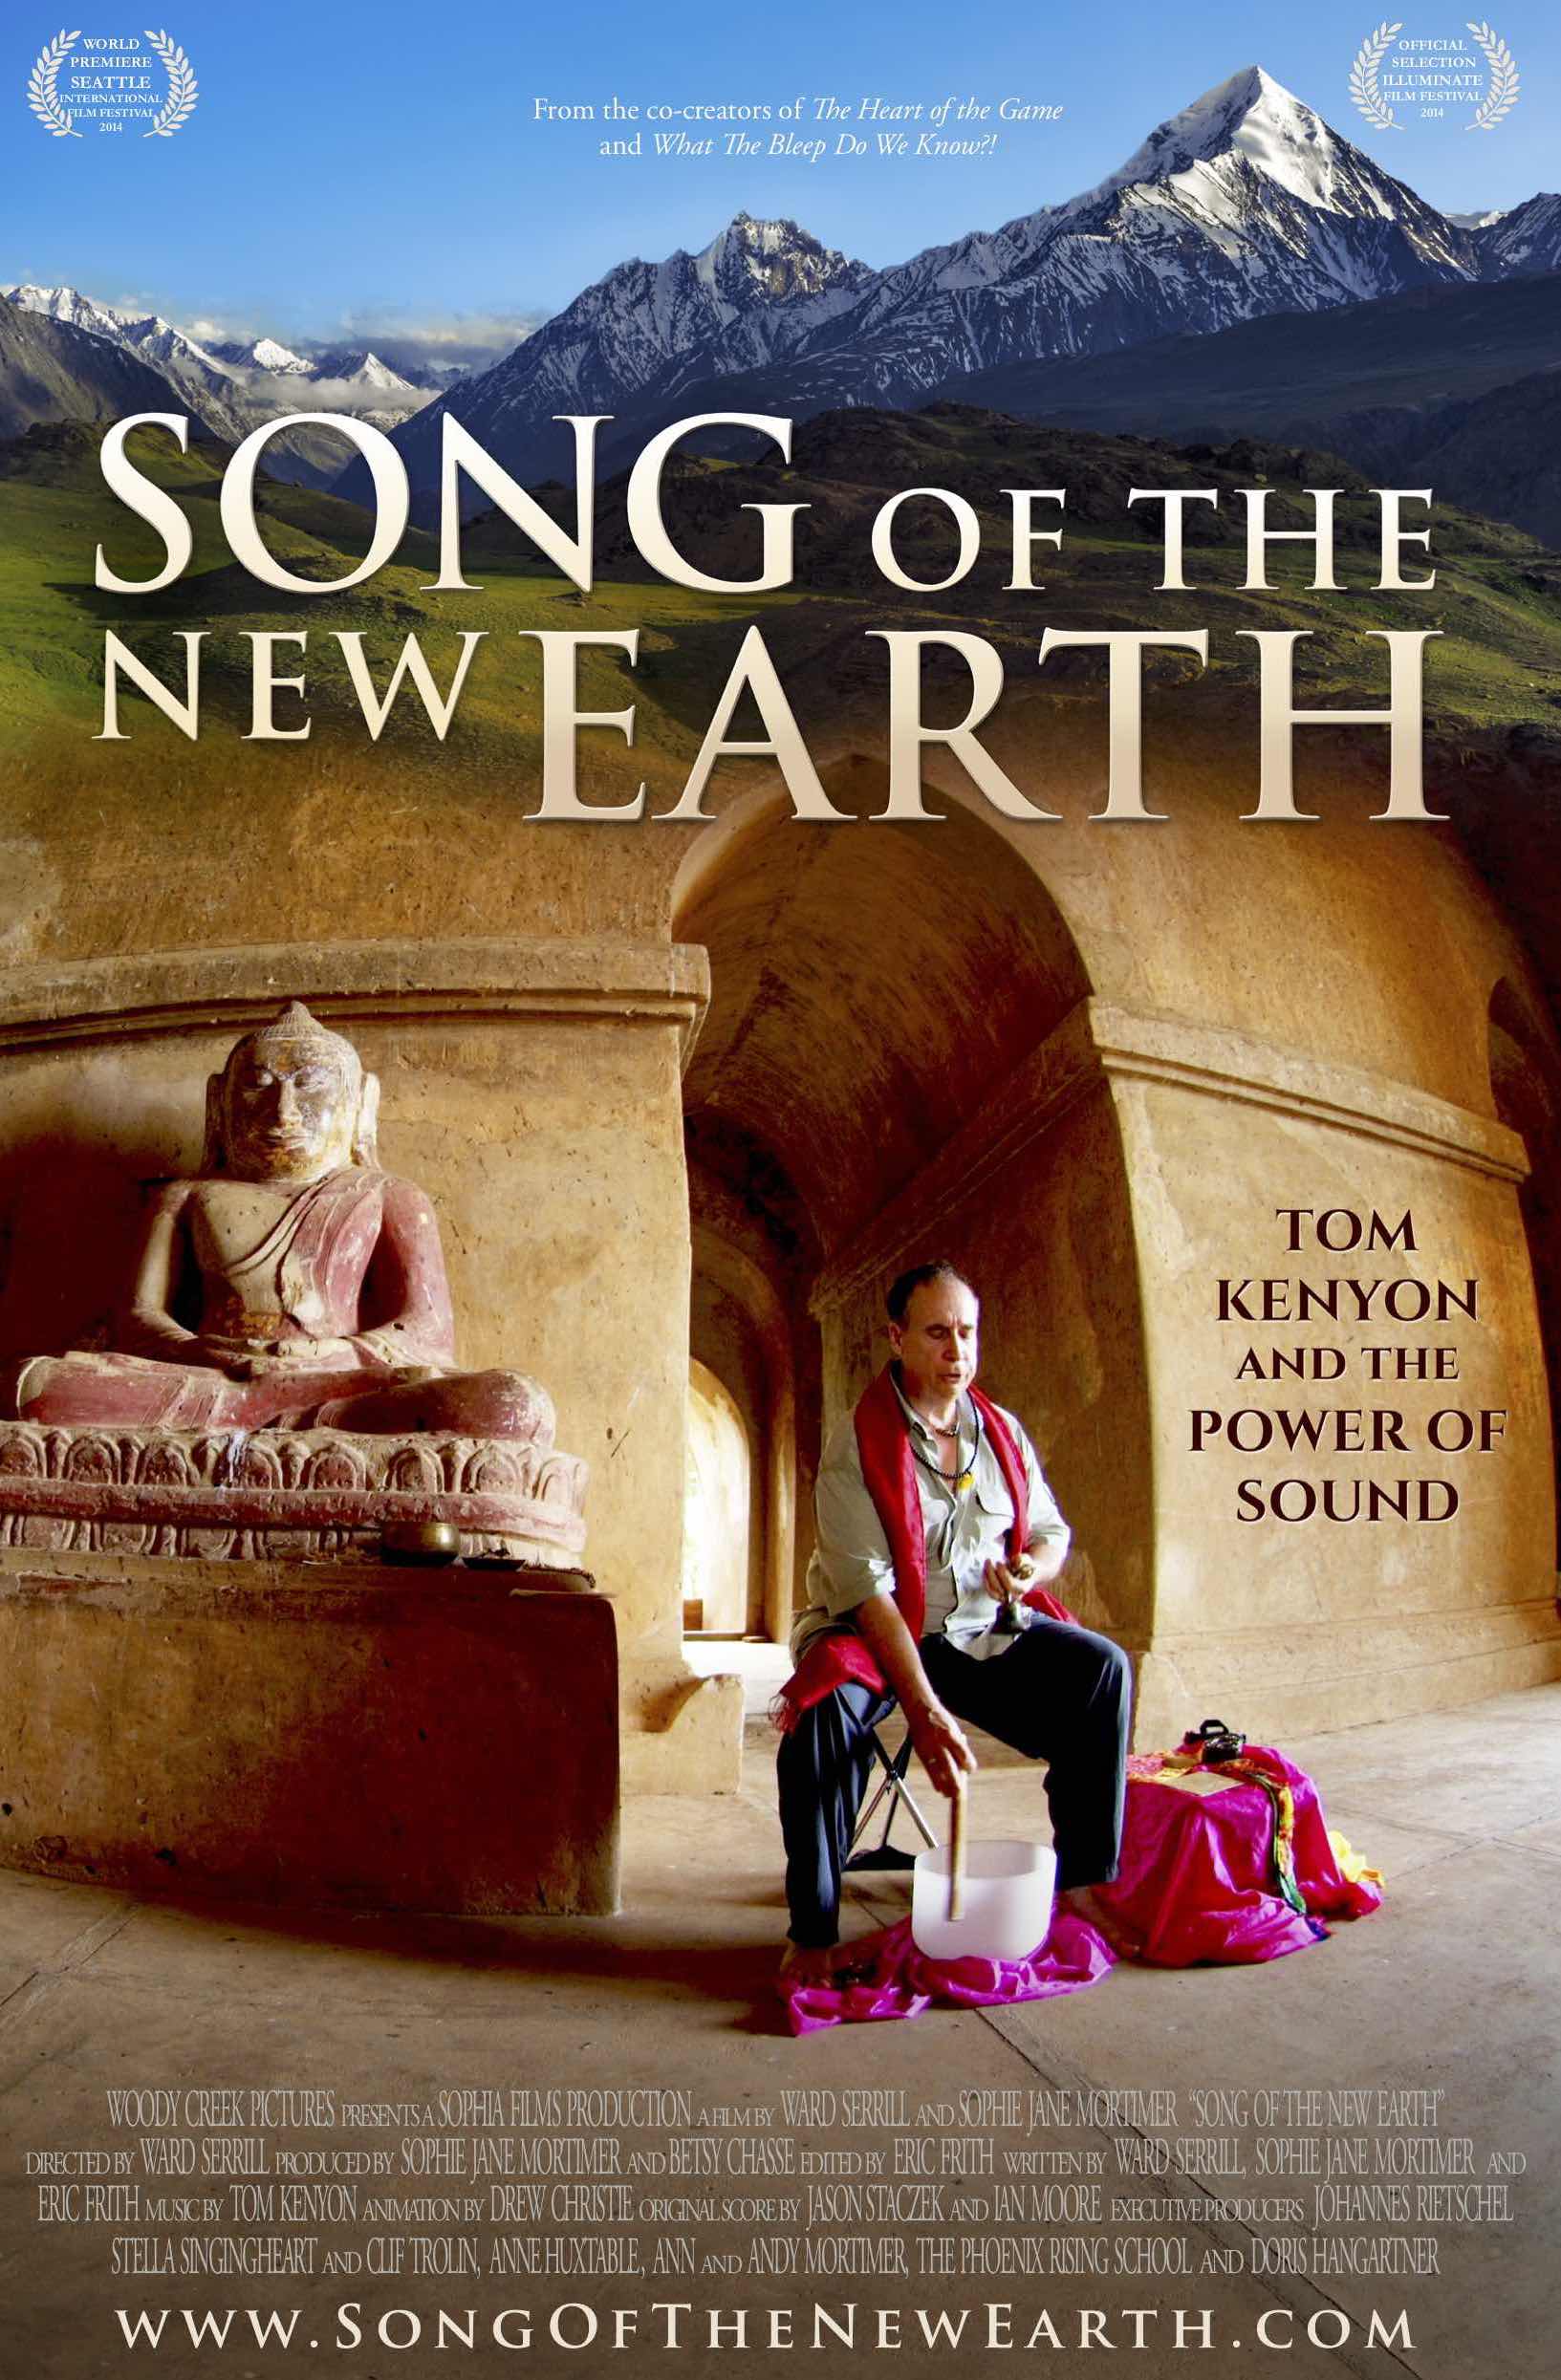 Song of the New Earth